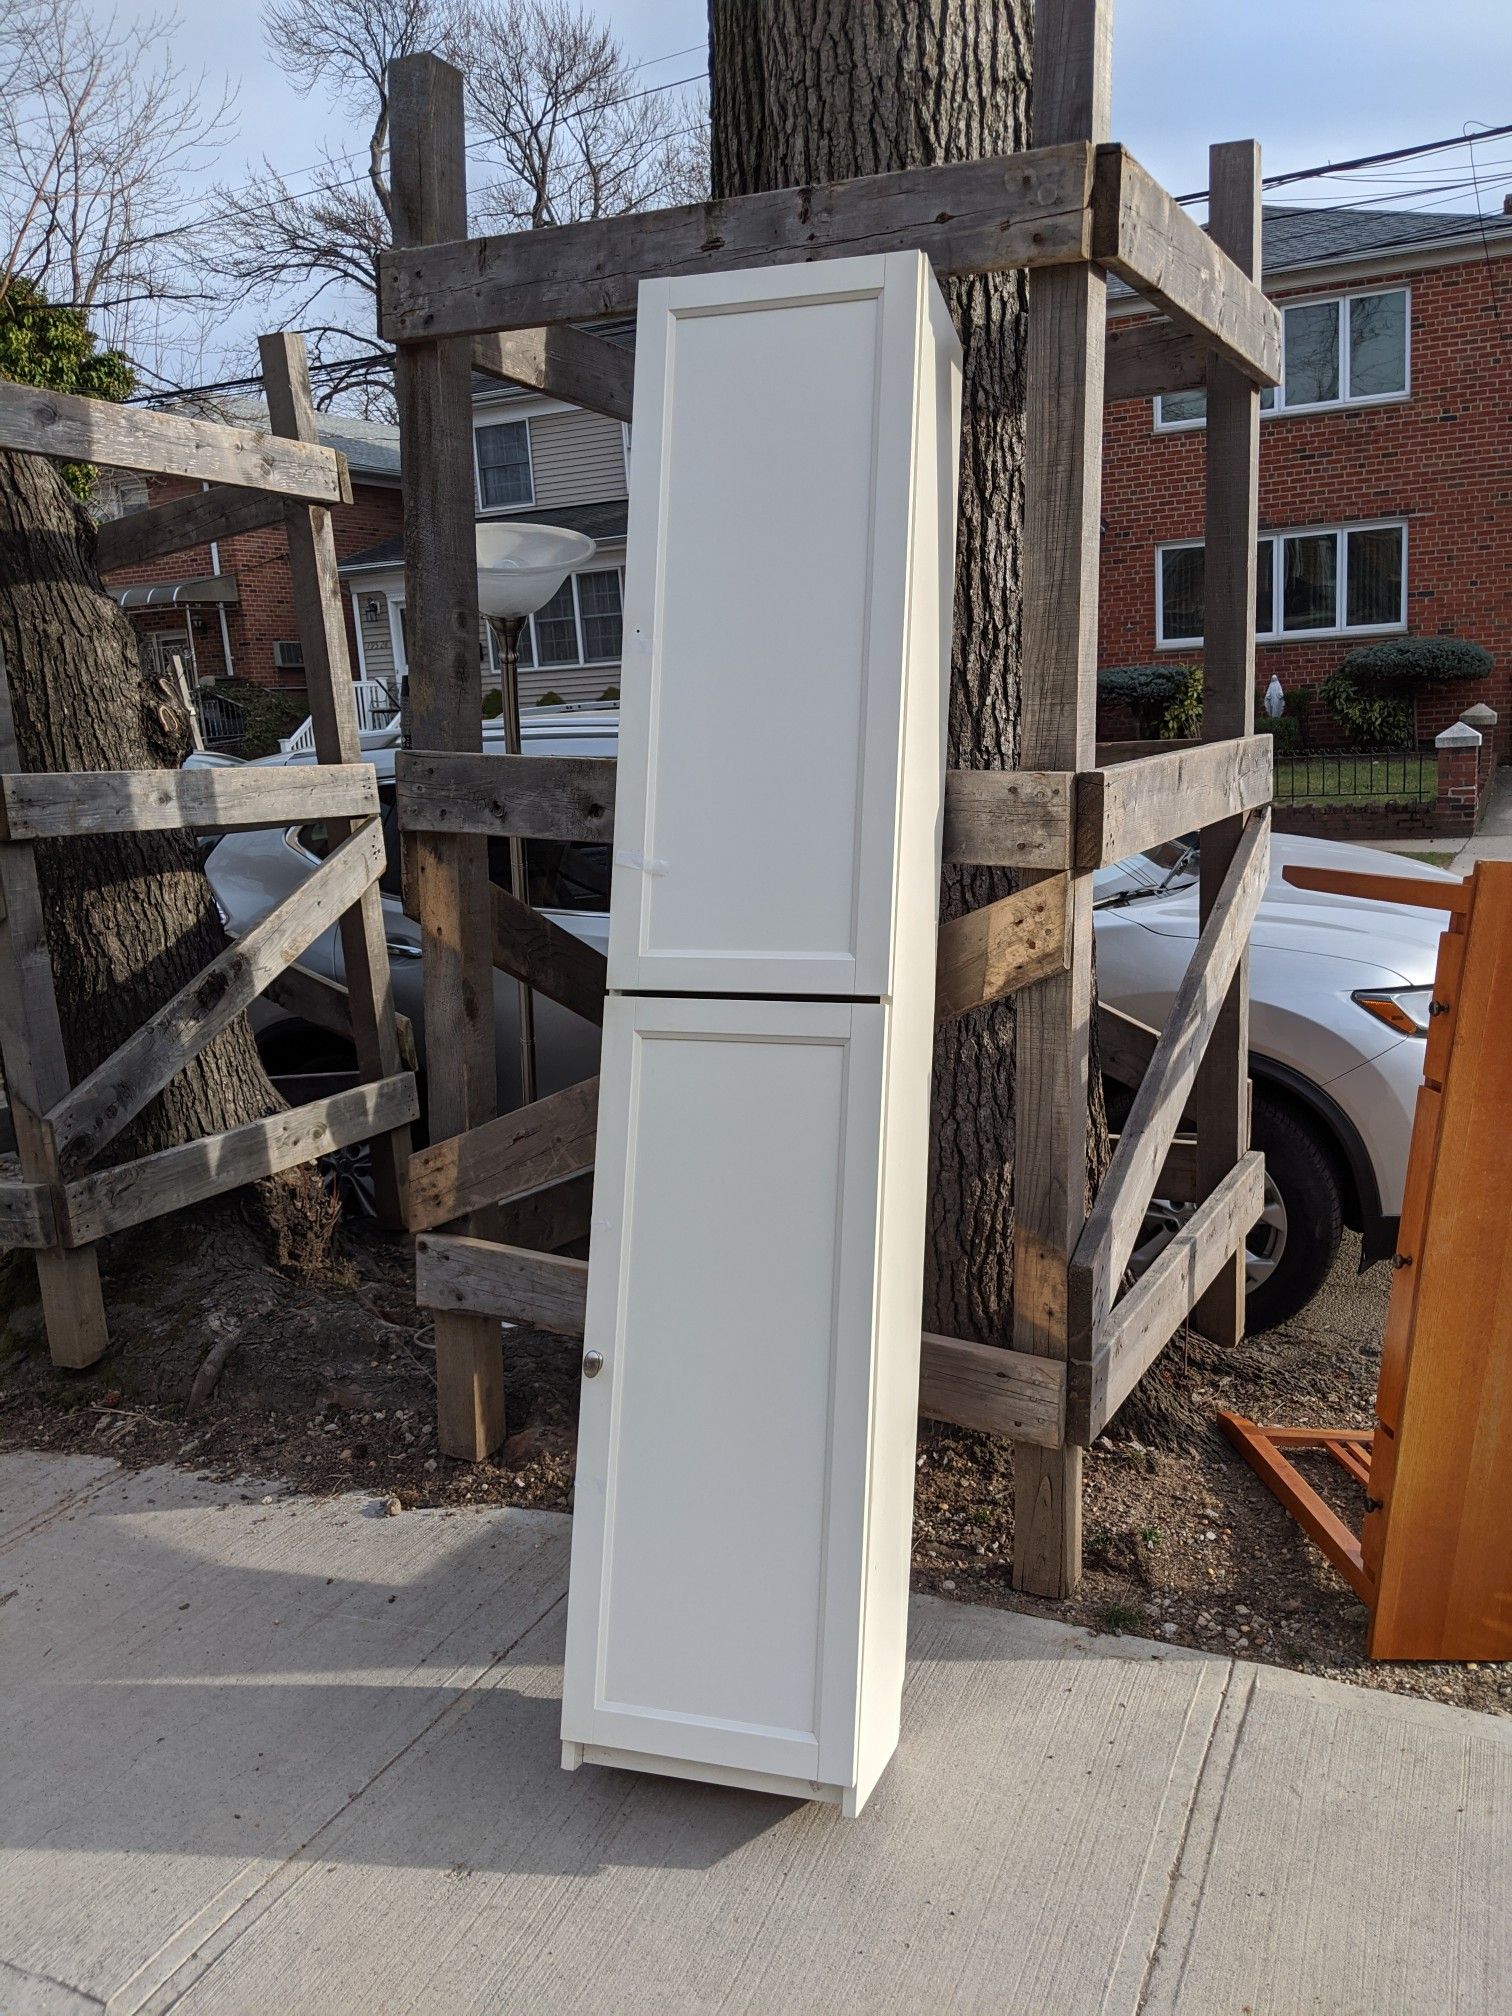 Curb alert desk and tall Ikea cabinet